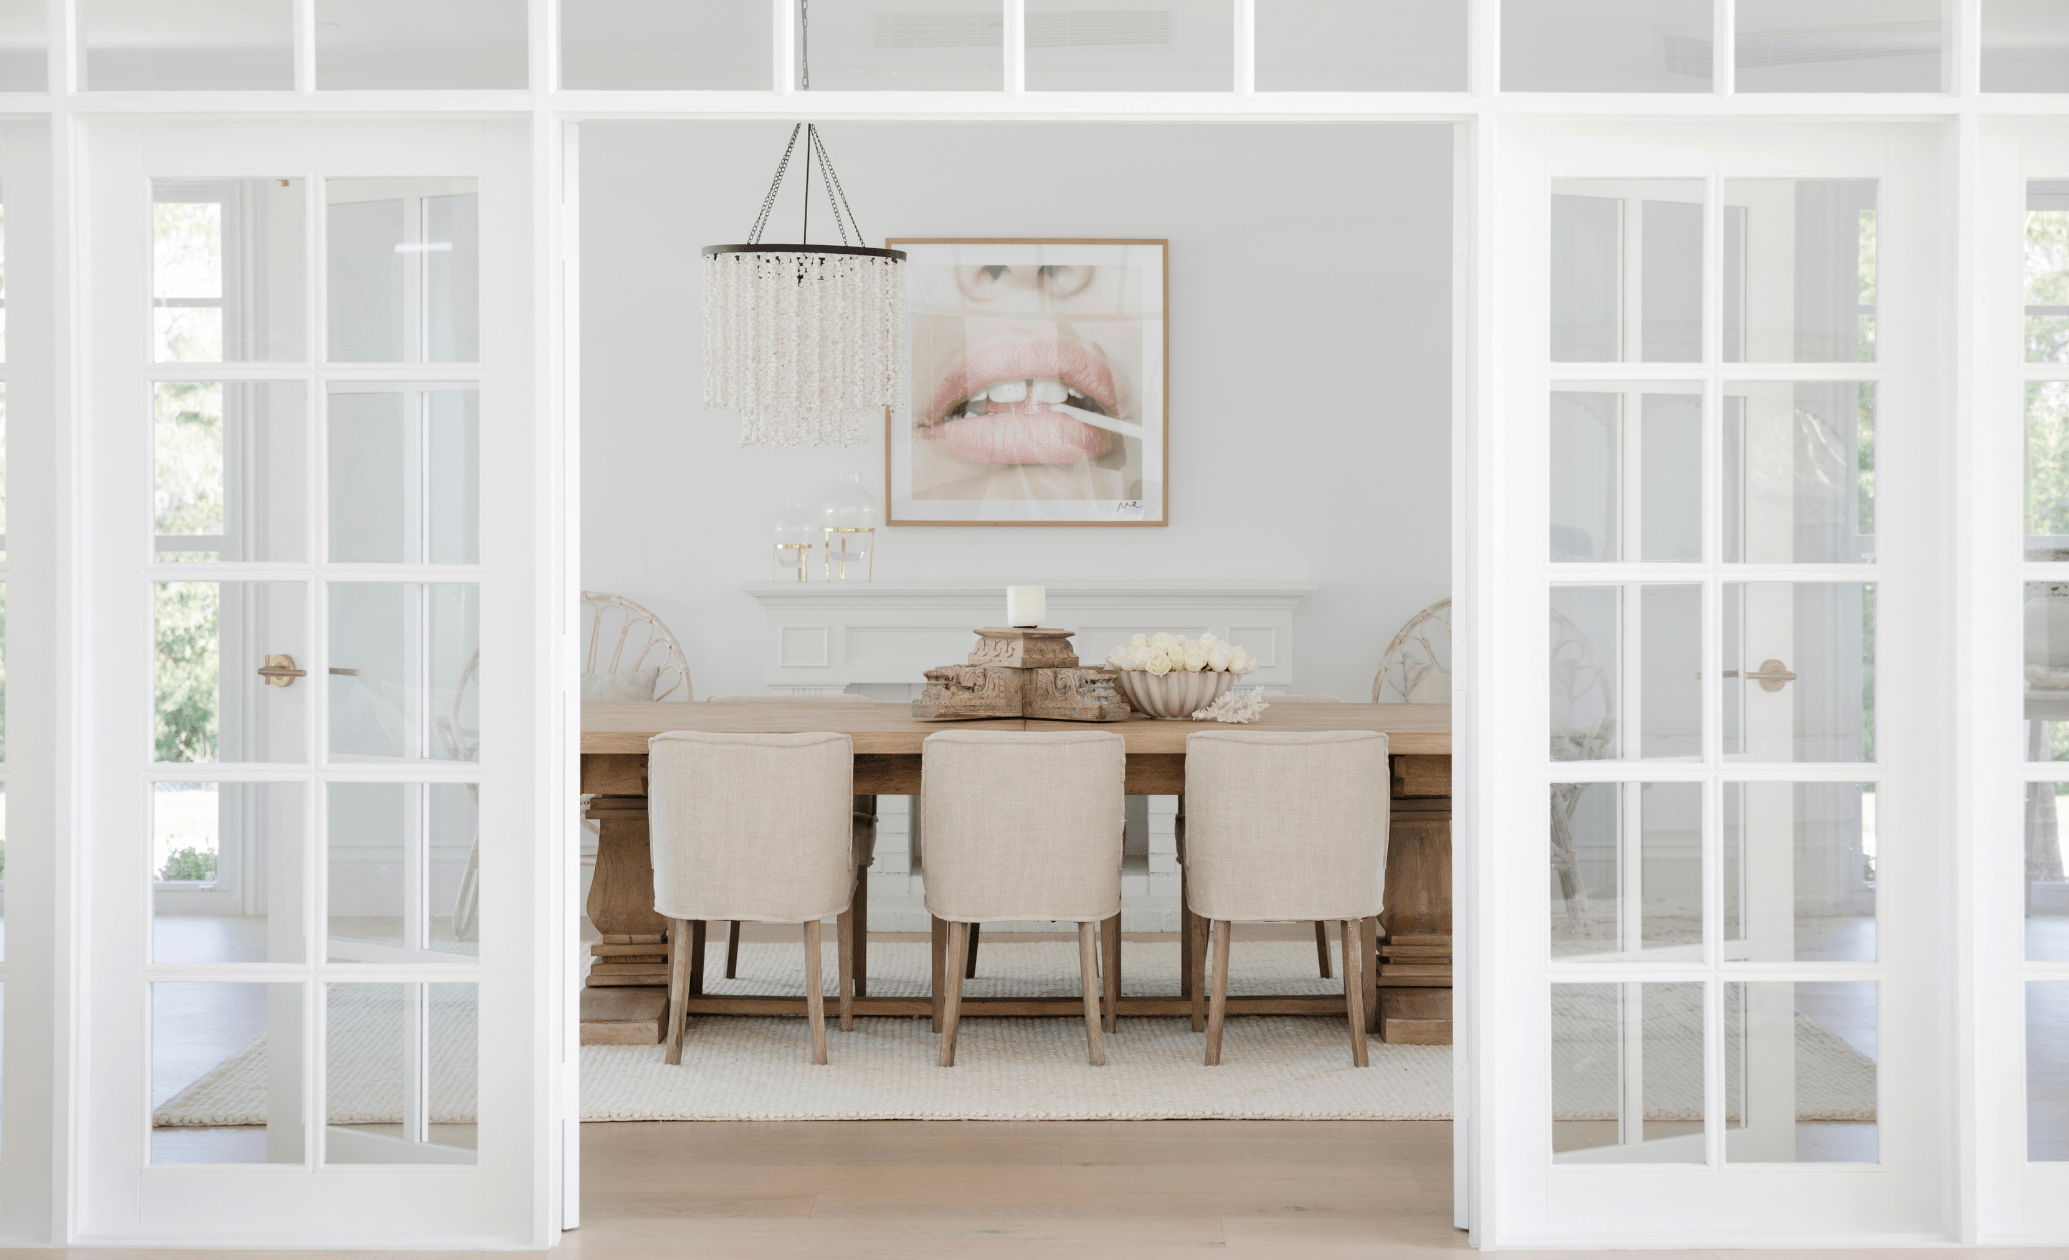 Adding Style and Elegance with French Doors